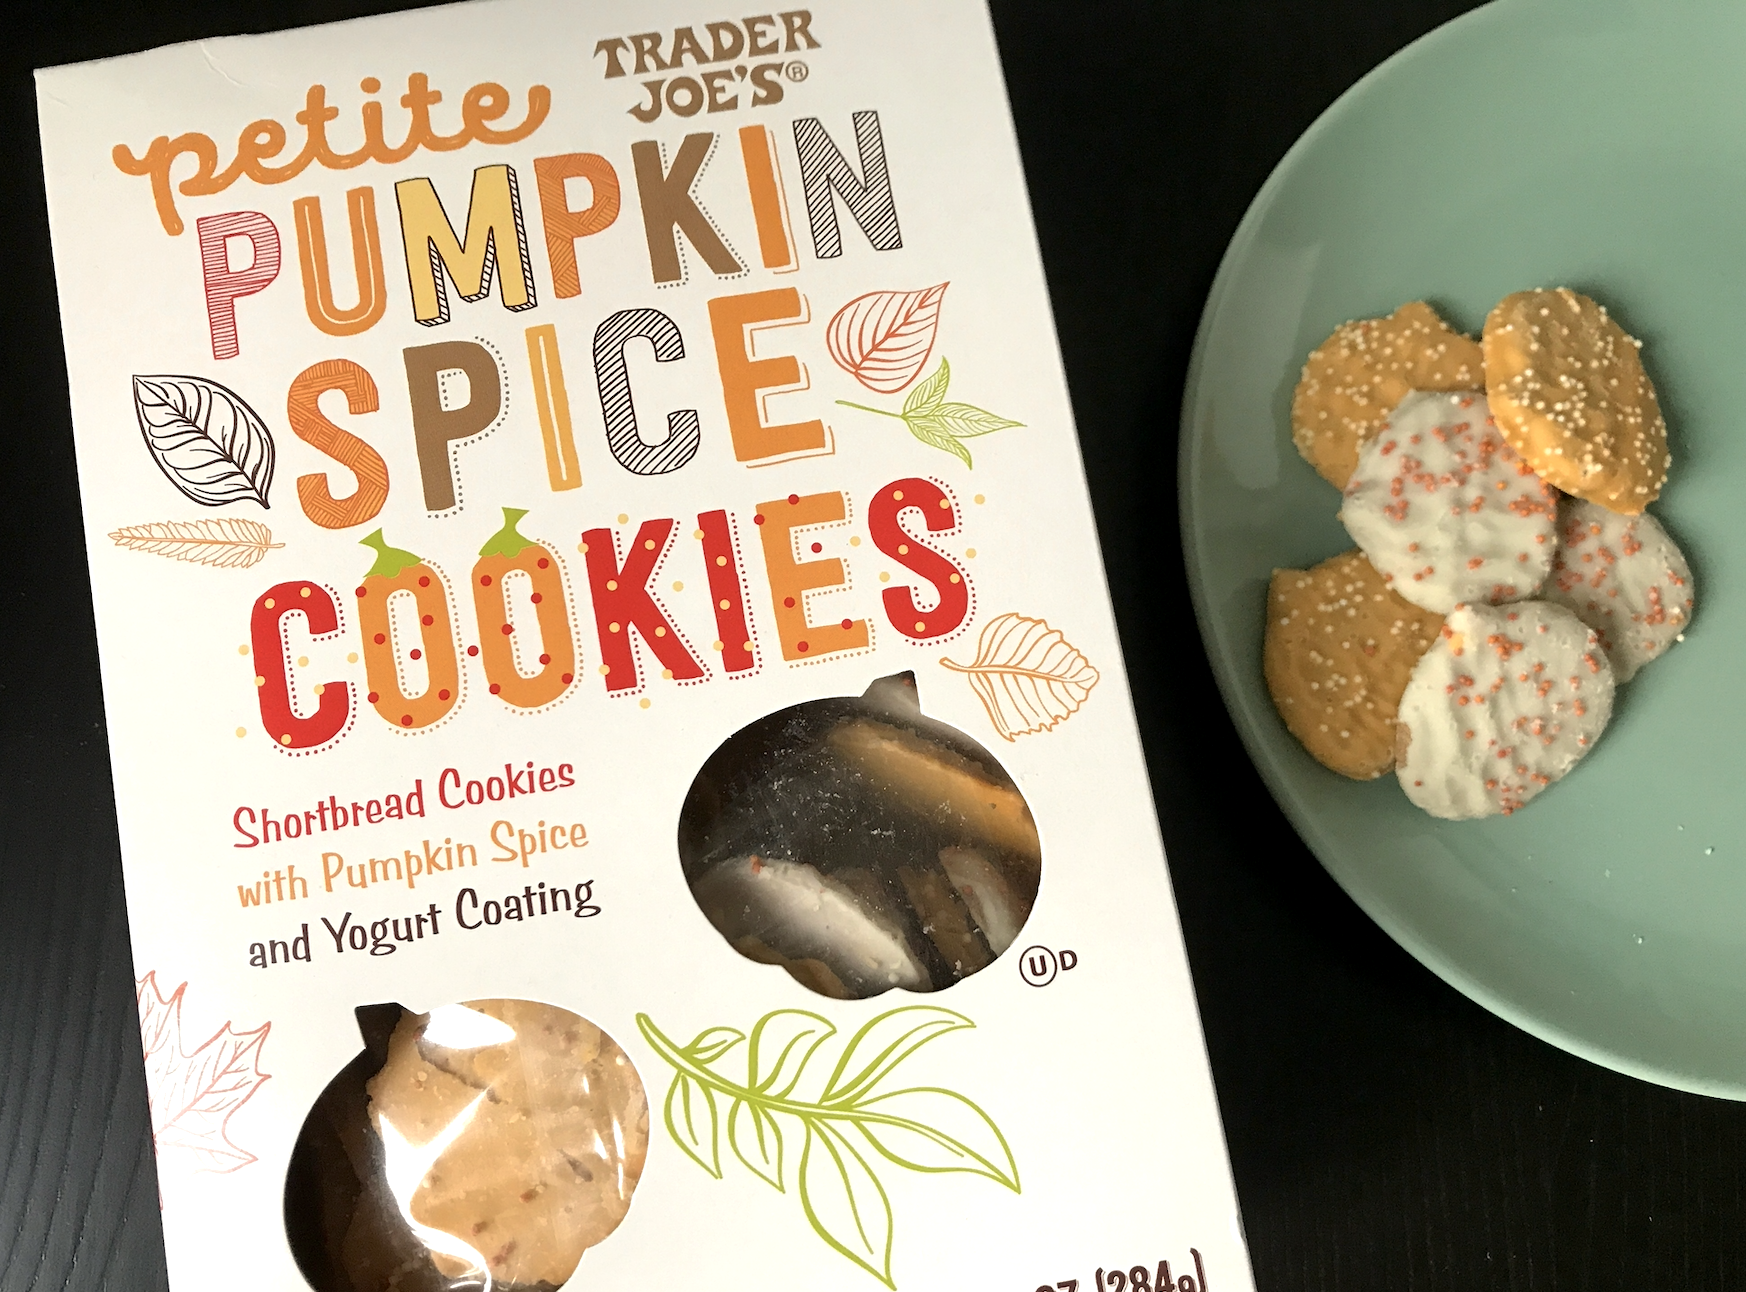 The petite pumpkin spice cookies box and a plate with cookies on it